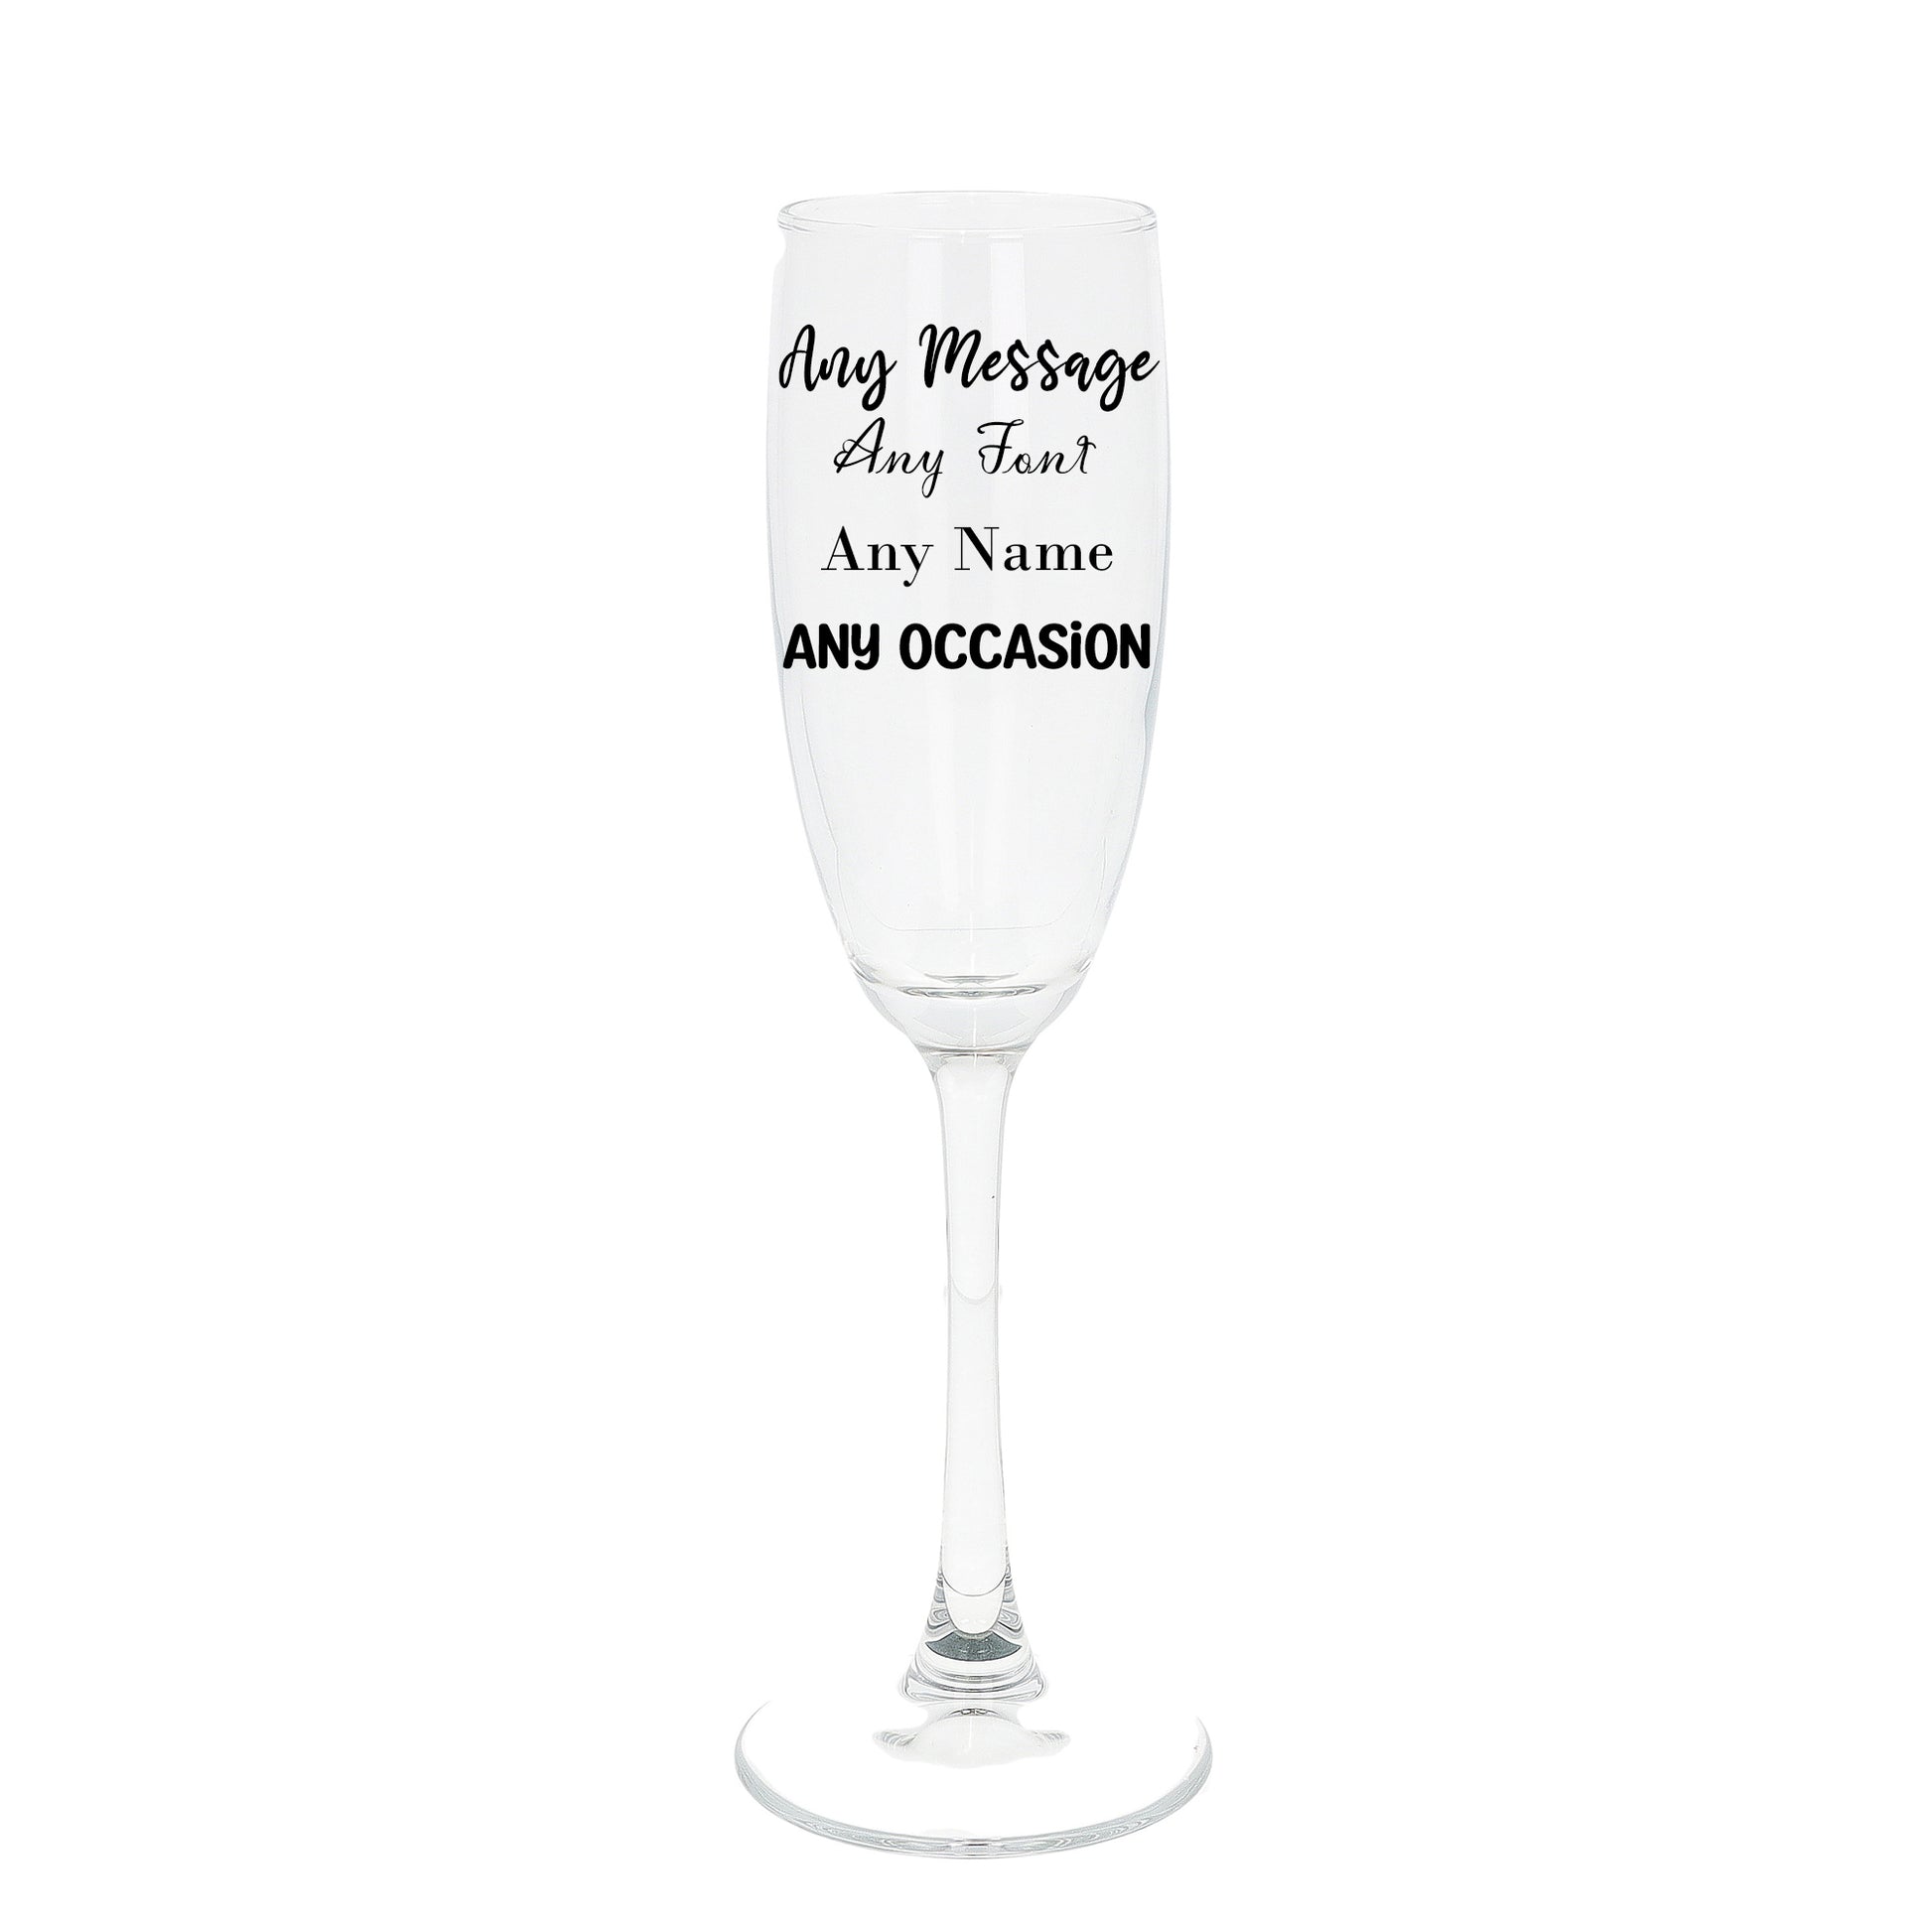 Create Your Own Standard Personalised Engraved Champagne Flute  - Always Looking Good - Glass Only  